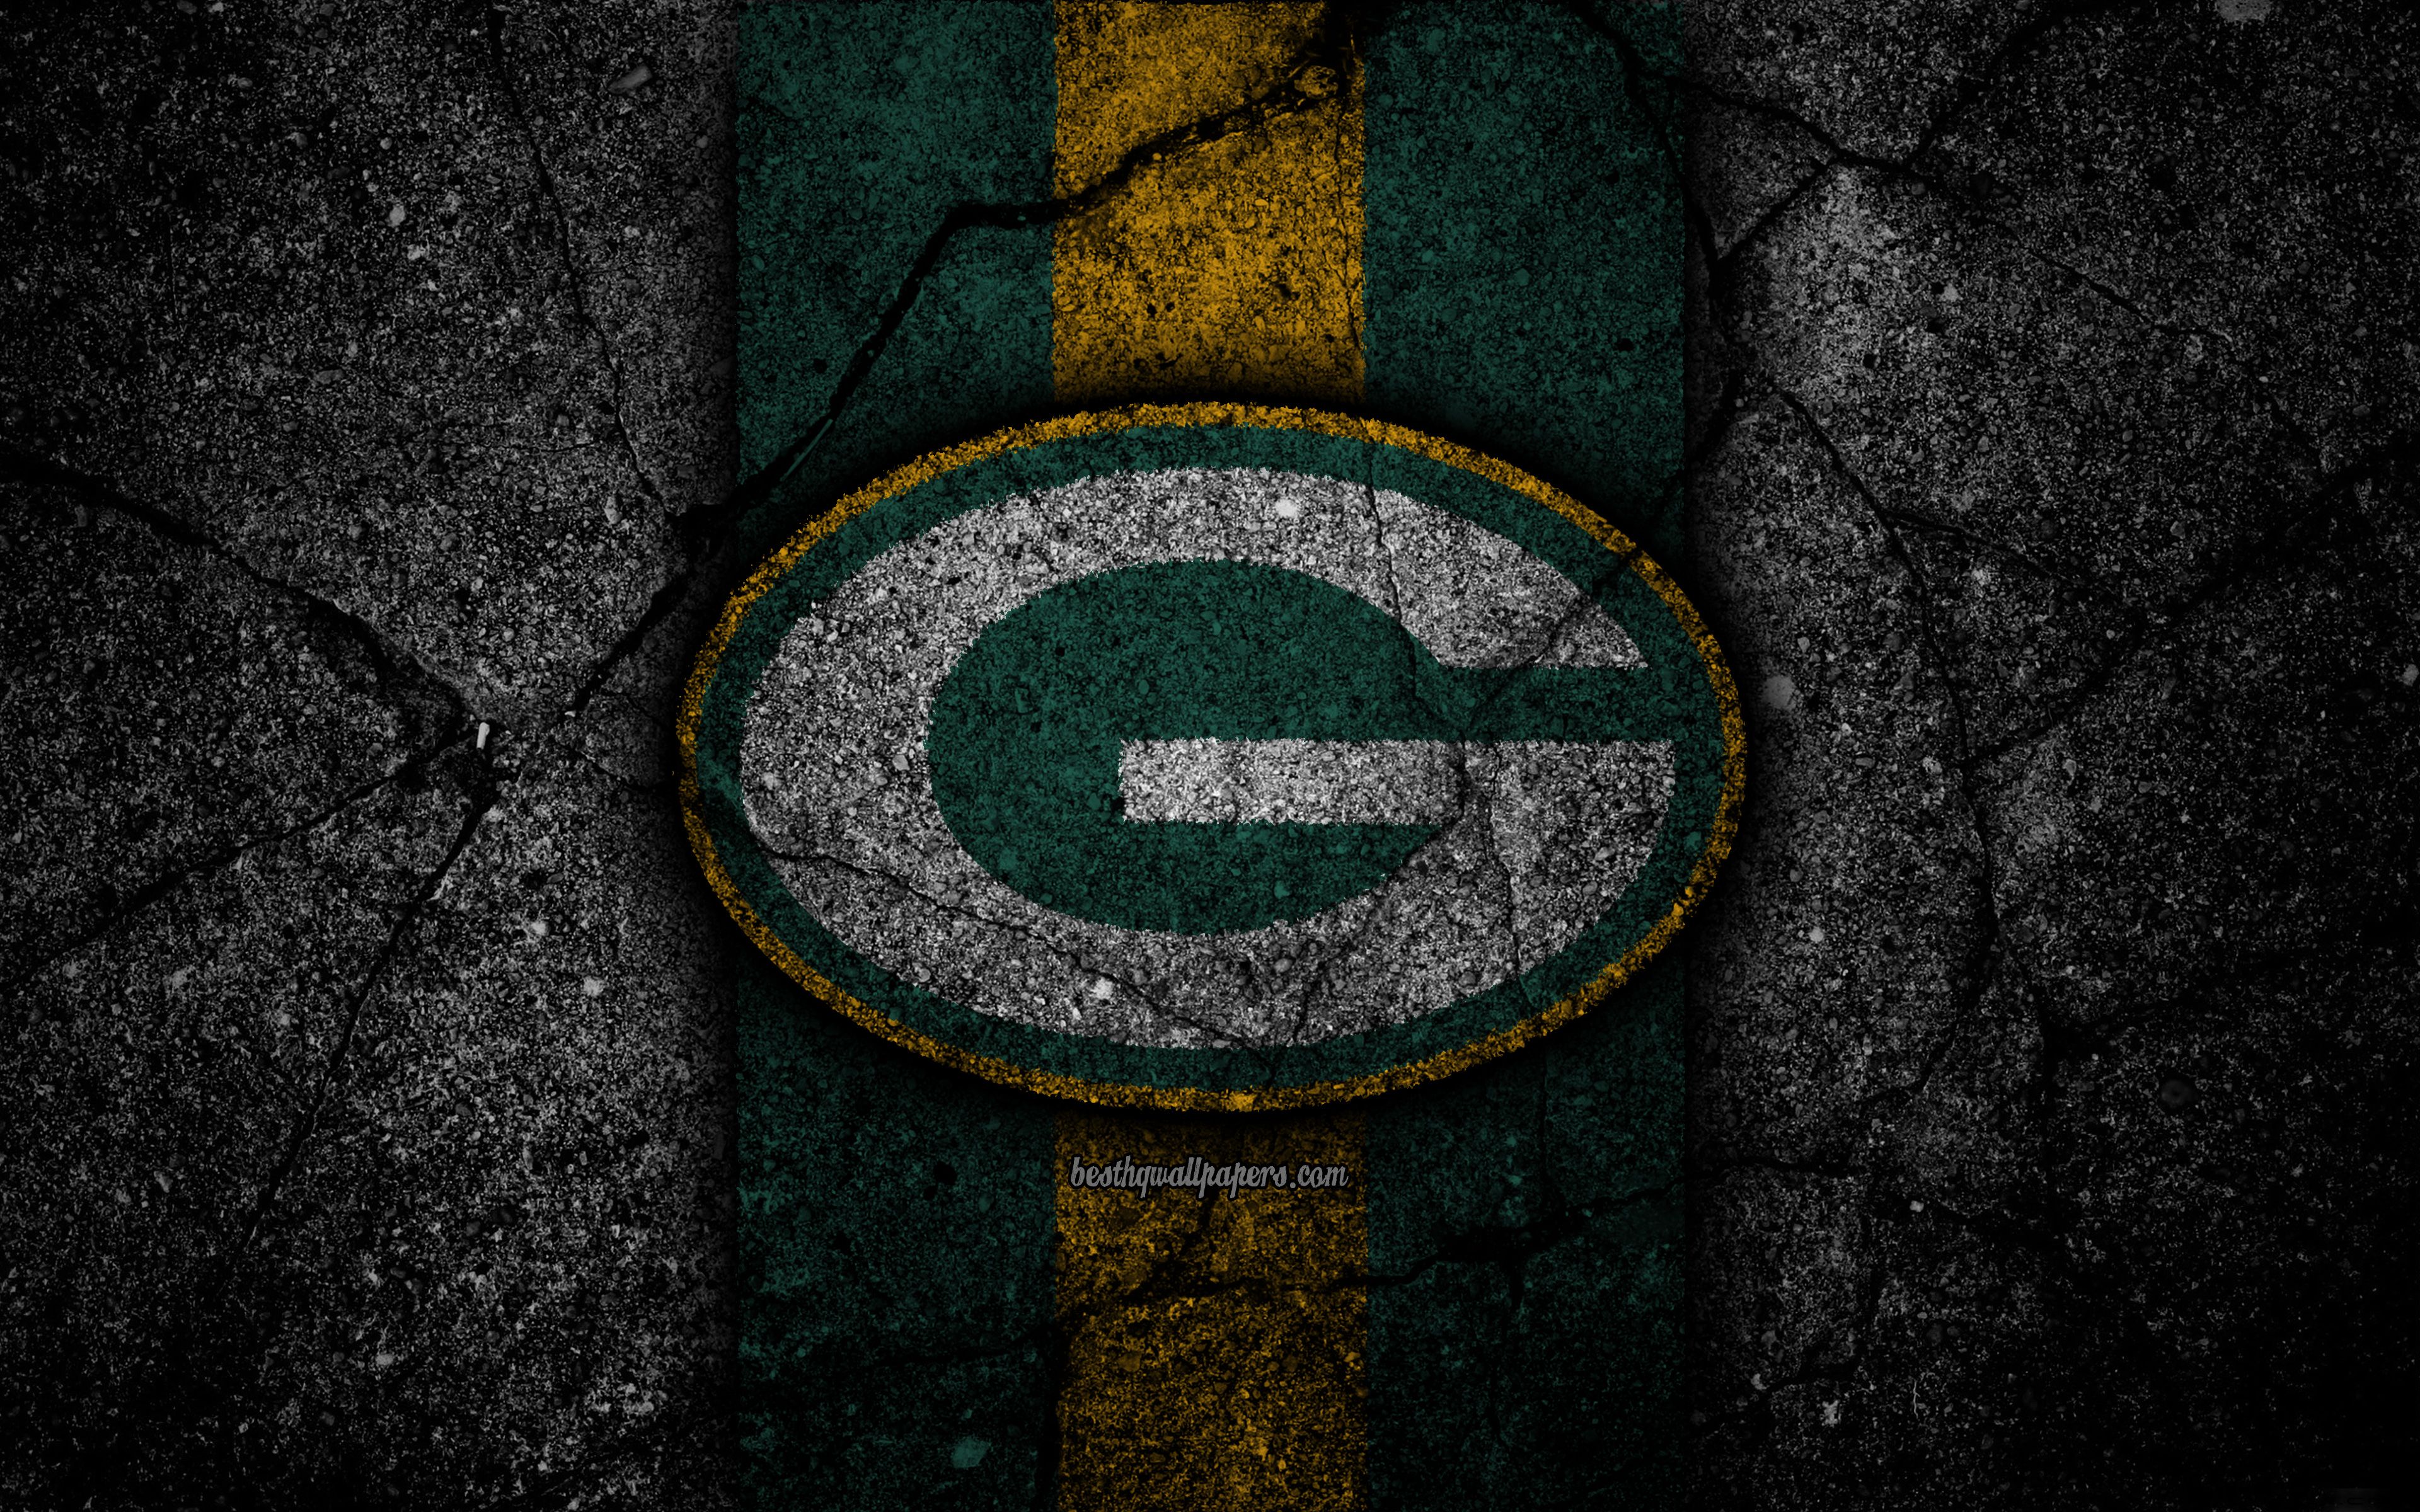 Download wallpaper 4k, Green Bay Packers, logo, black stone, NFL, NFC, american football, USA, art, asphalt texture, North Division for desktop with resolution 3840x2400. High Quality HD picture wallpaper